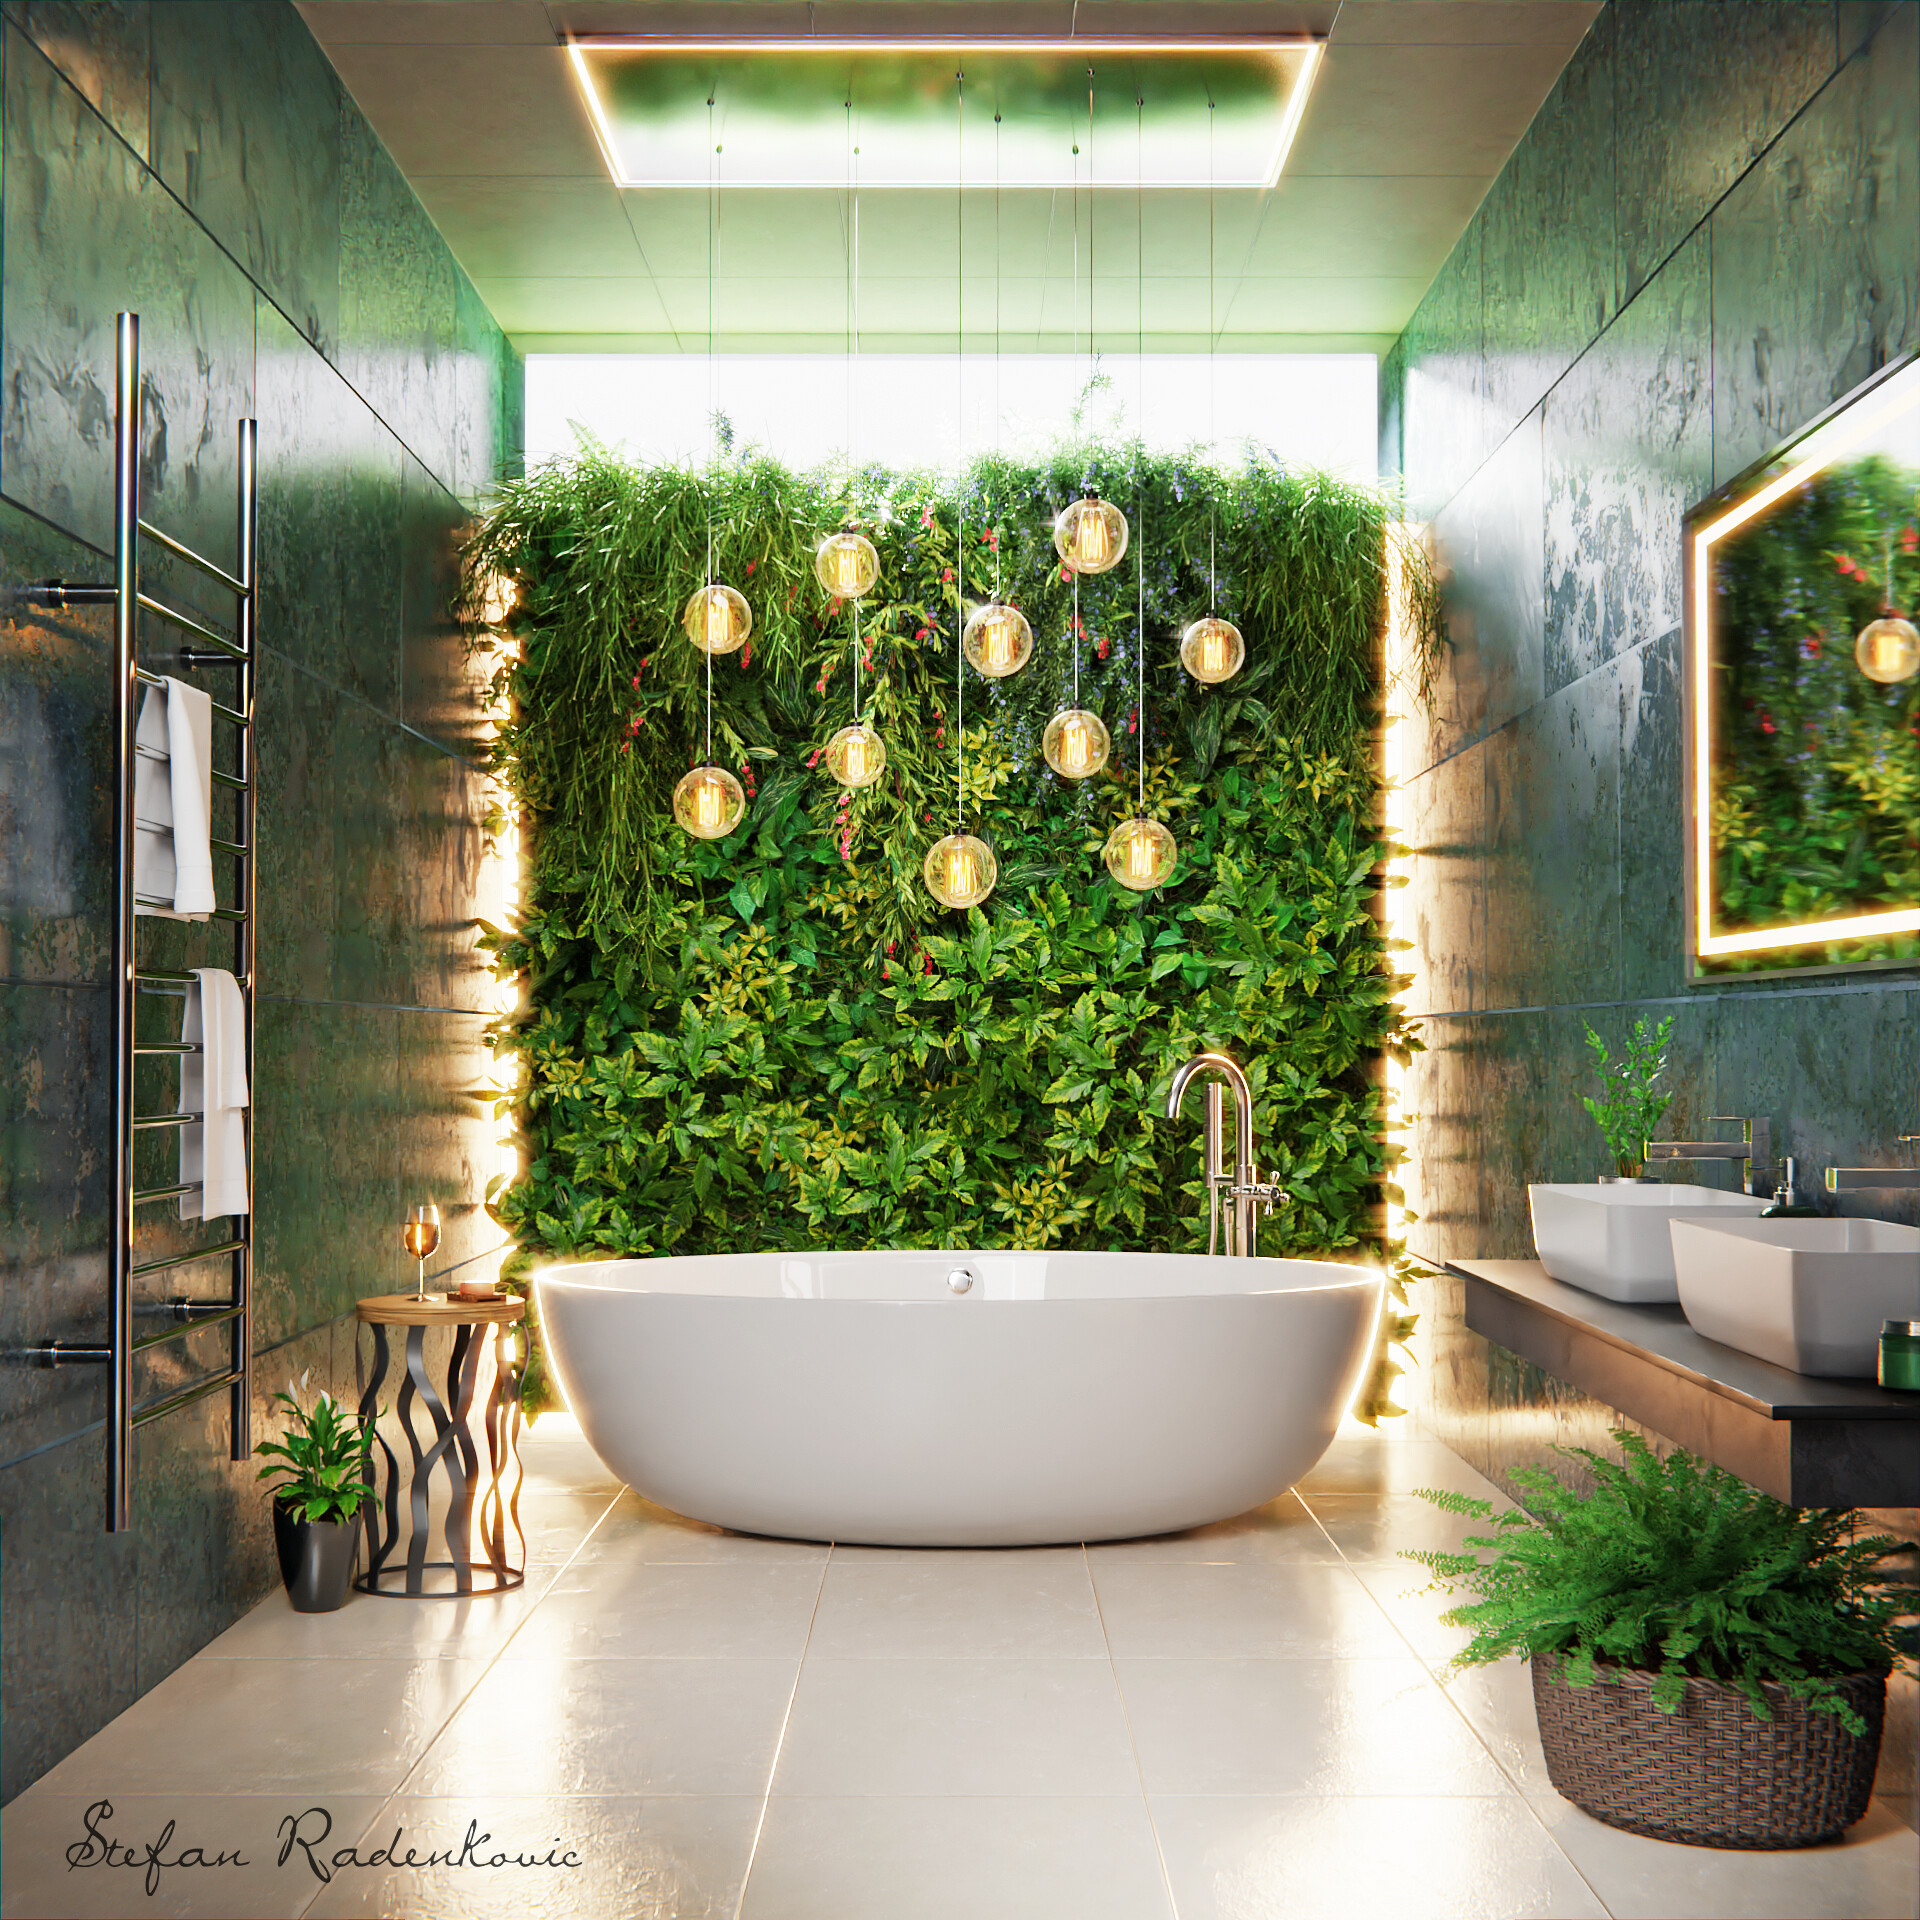 Green wall bathroom, the concept of bringing nature indoors has gained widespread popularity in interior design, with green walls